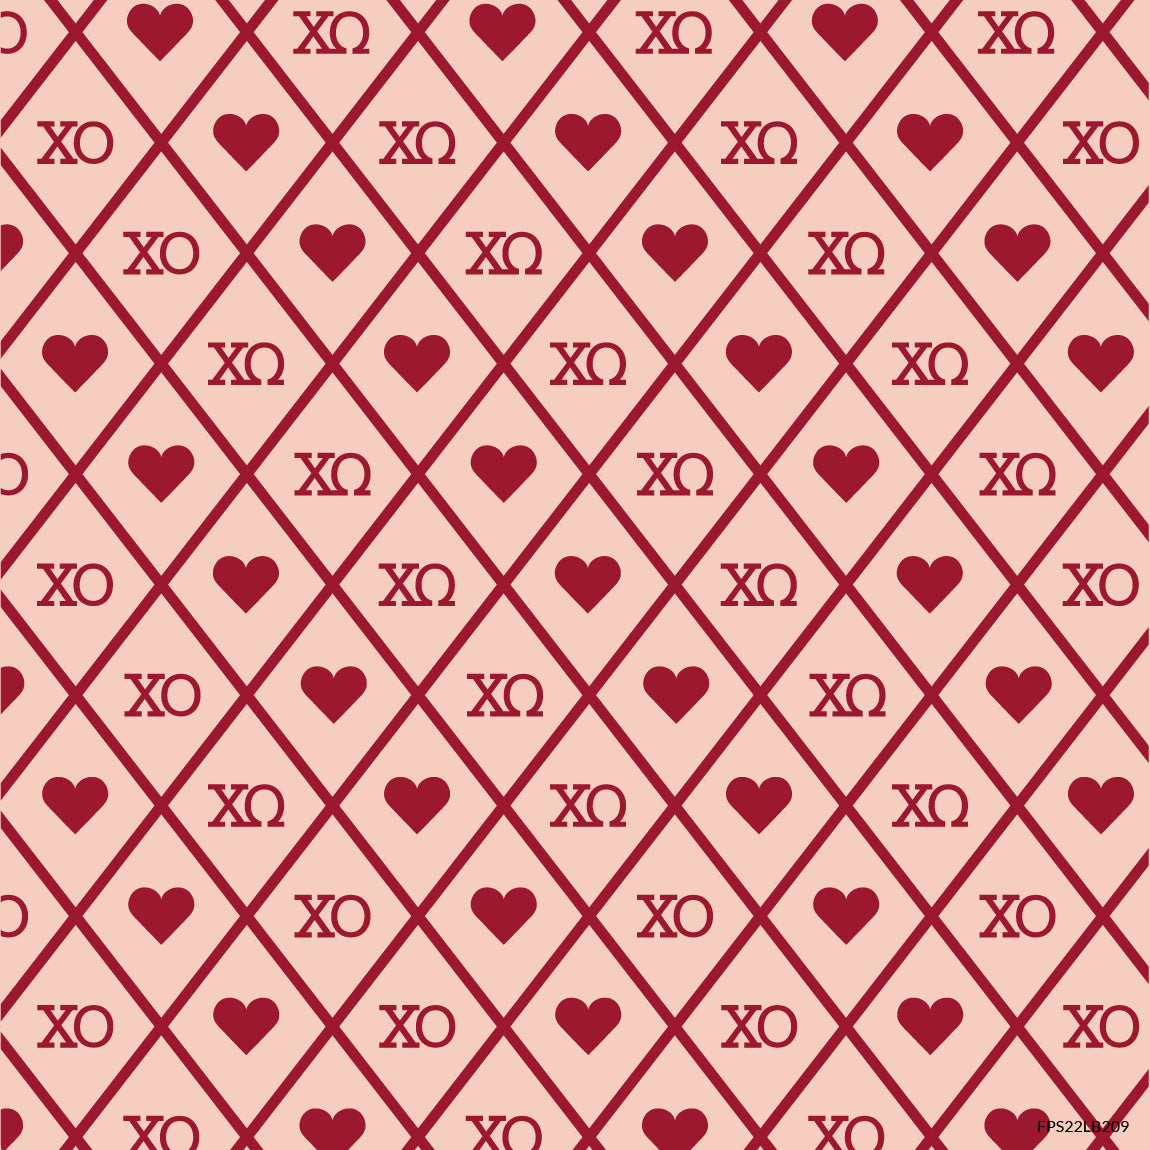 Hearts and Patterns